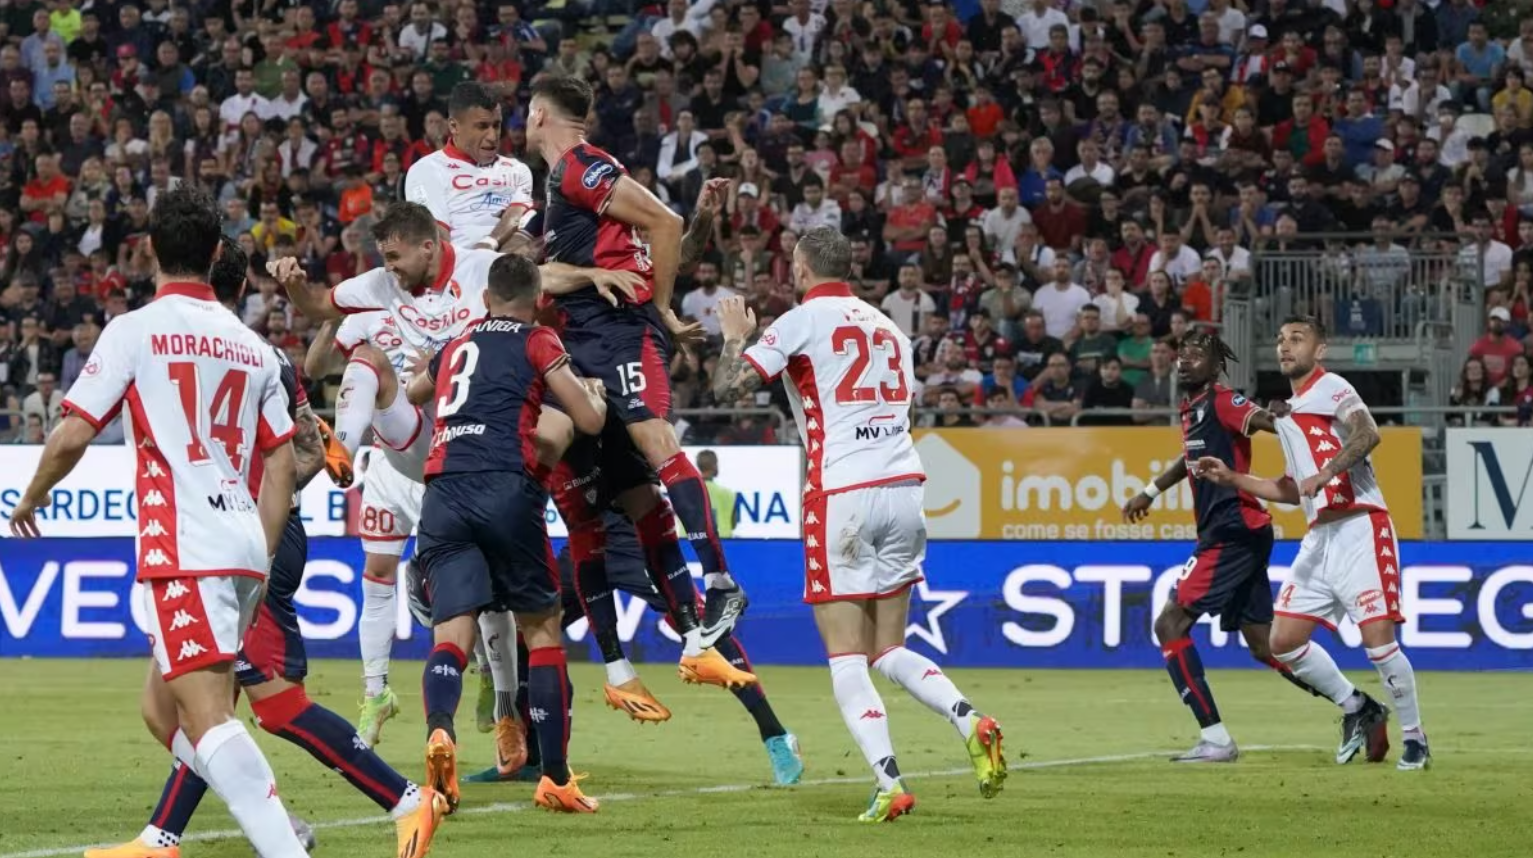 Cagliari and Bari shared the spoils at the Unipol Domus Arena in the first leg of a playoff to determine the final participant to the Serie A 2023/24